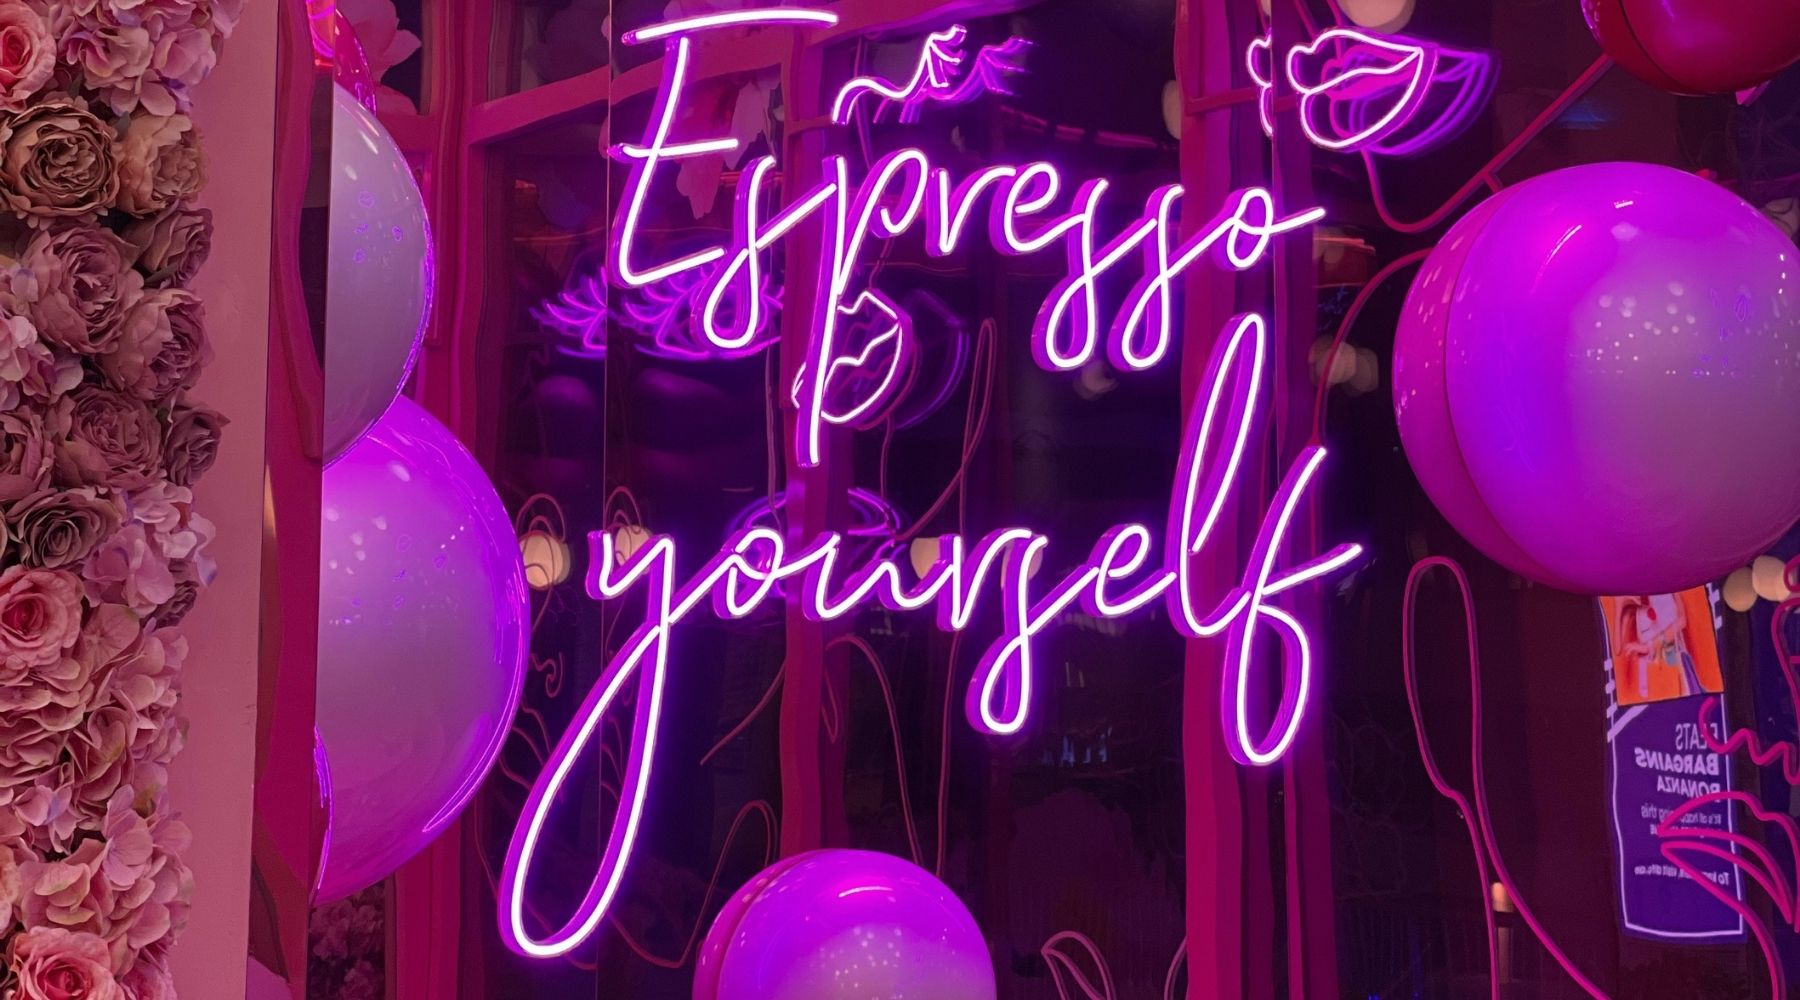 espresso yourself launch party neon sign